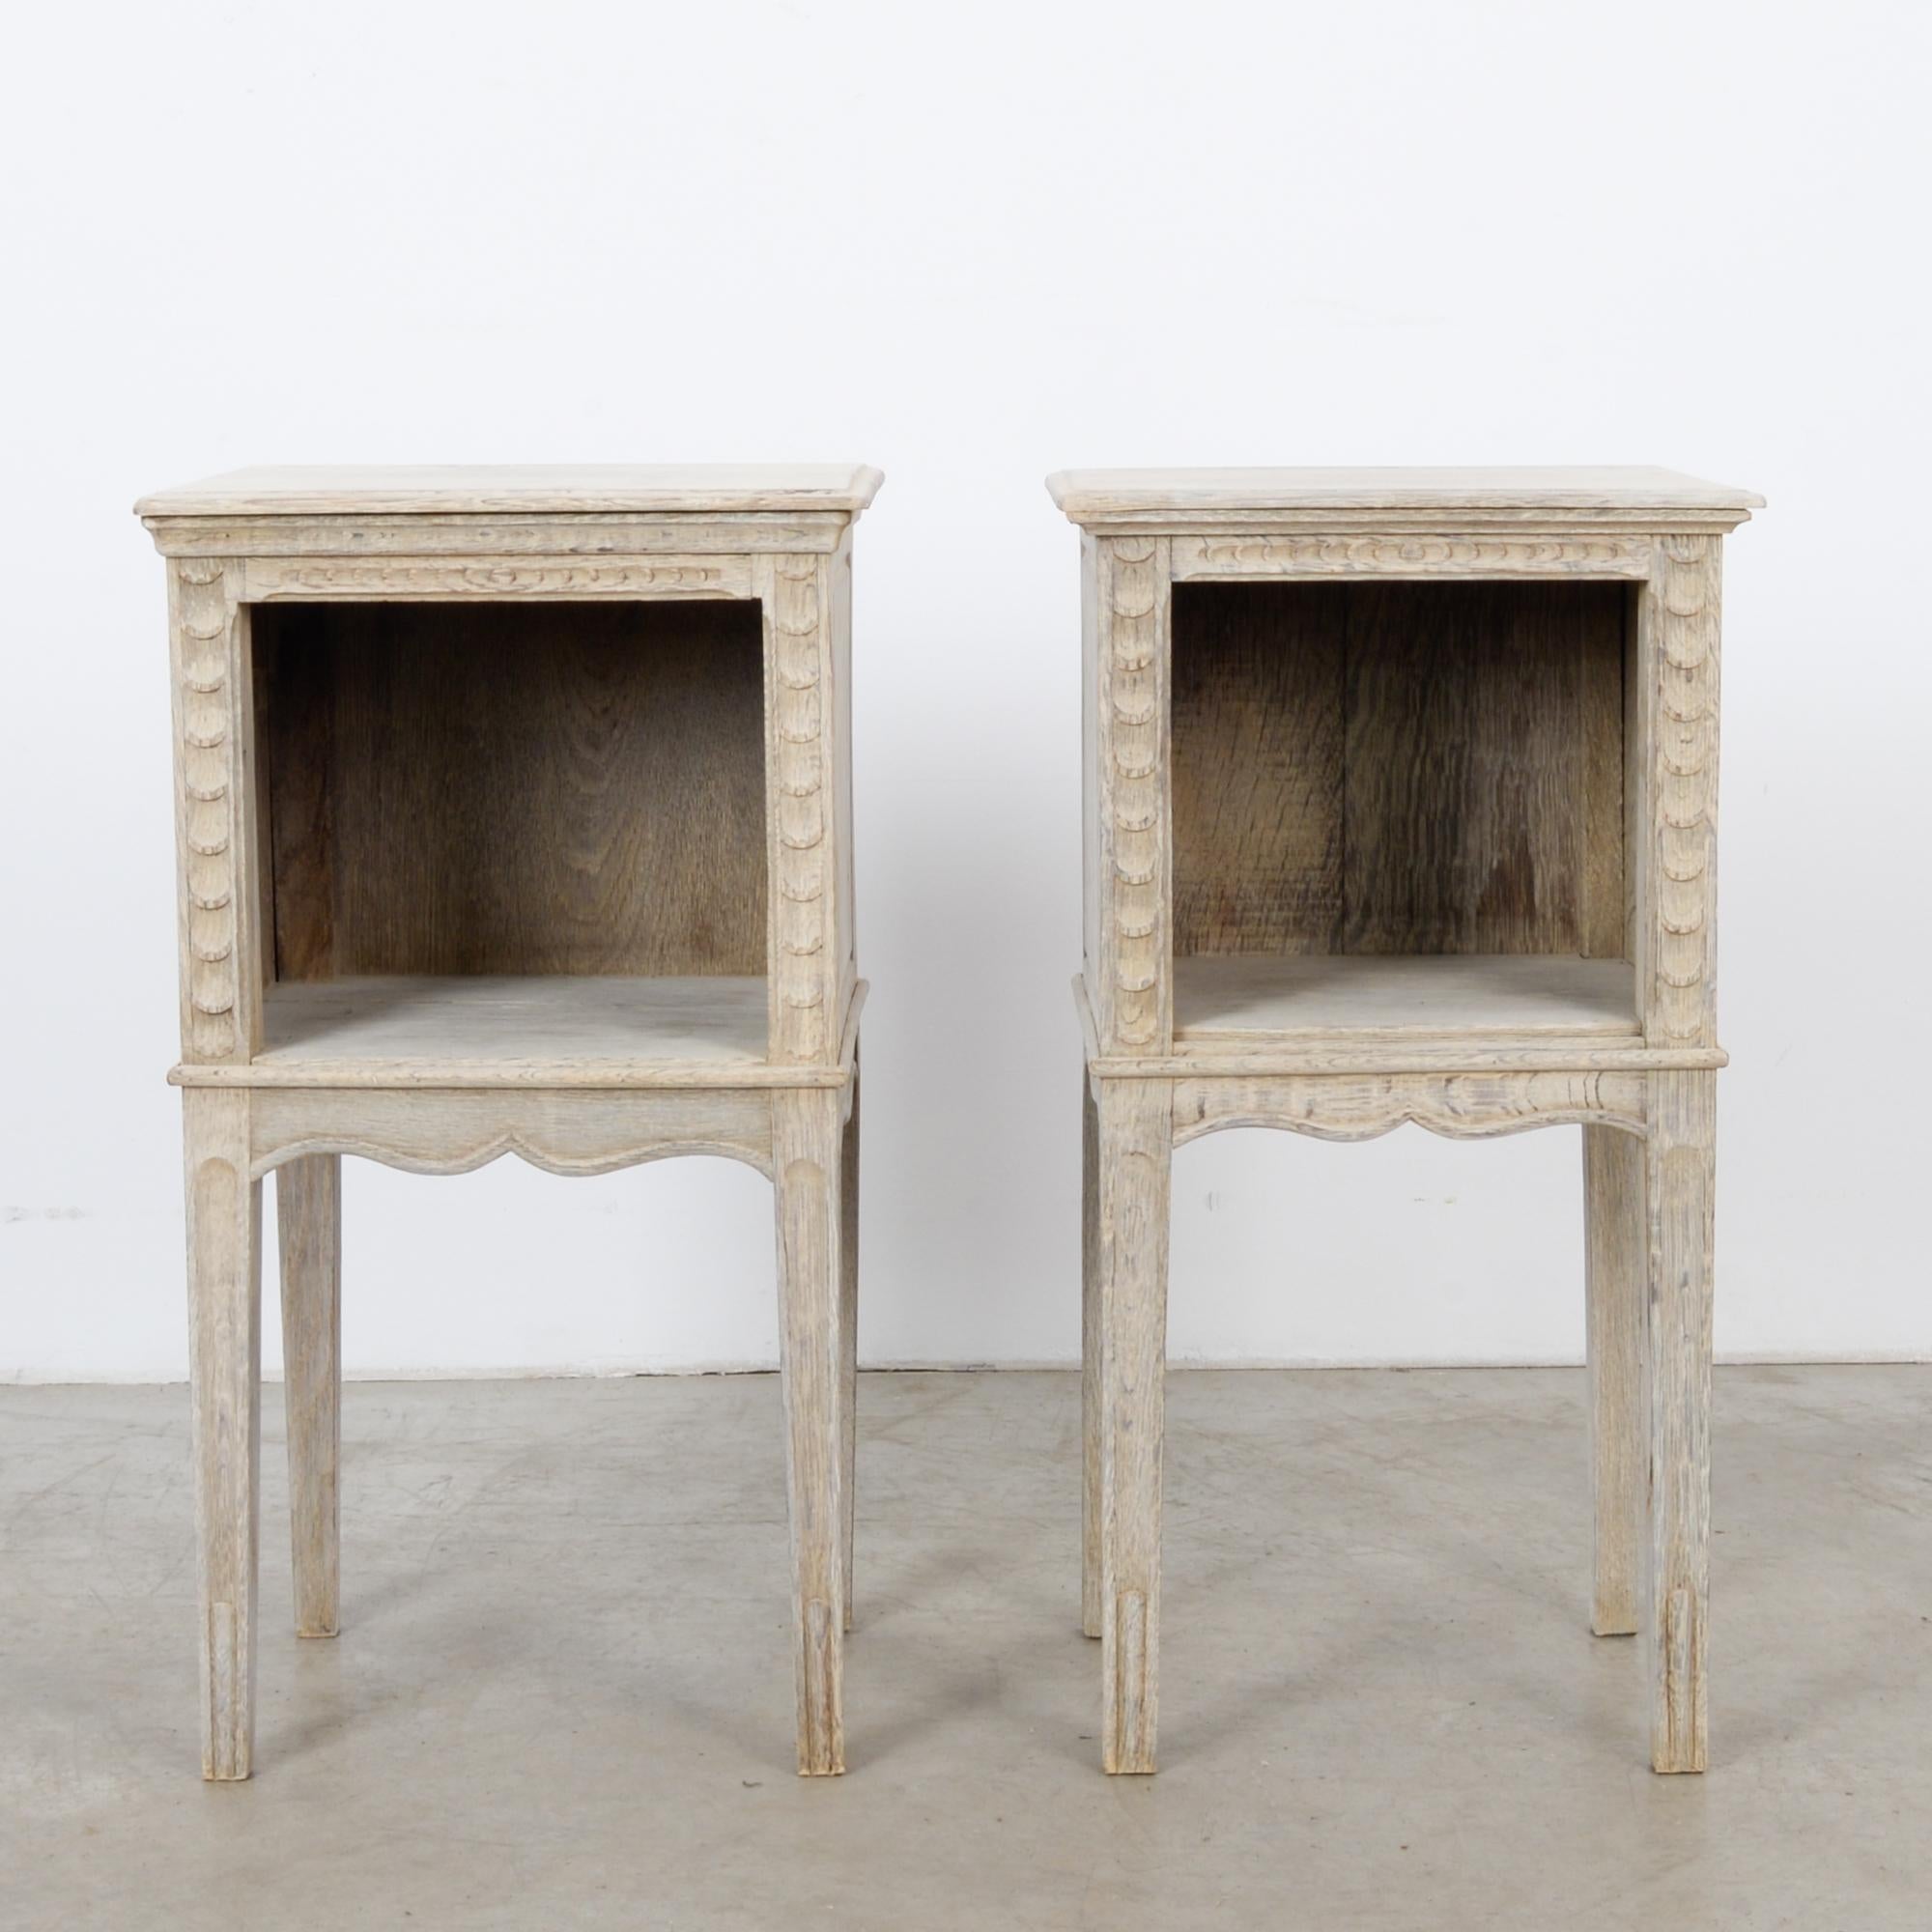 This pair of bleached oak side tables was made in France, circa 1920. They stand on slightly tapered and angular legs featuring ridges at the bottom. The scalloped apron and moldings on all sides show off its outstanding craftsmanship. With a shelf